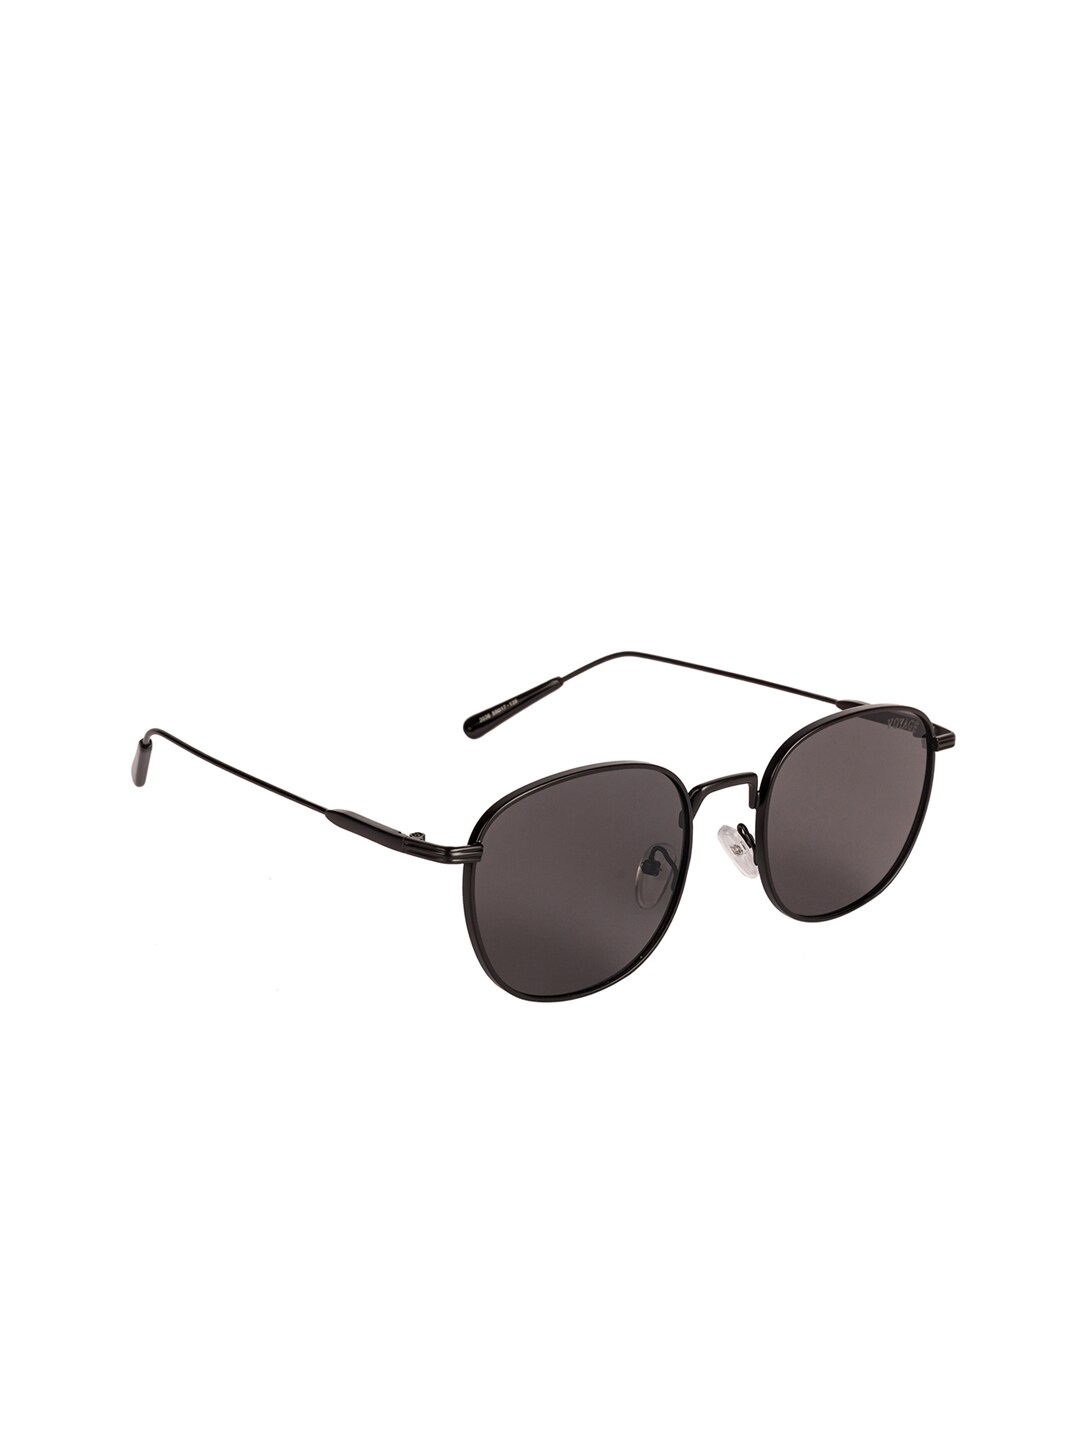 Voyage Unisex Rectangle Sunglasses 2036MG2975 Price in India